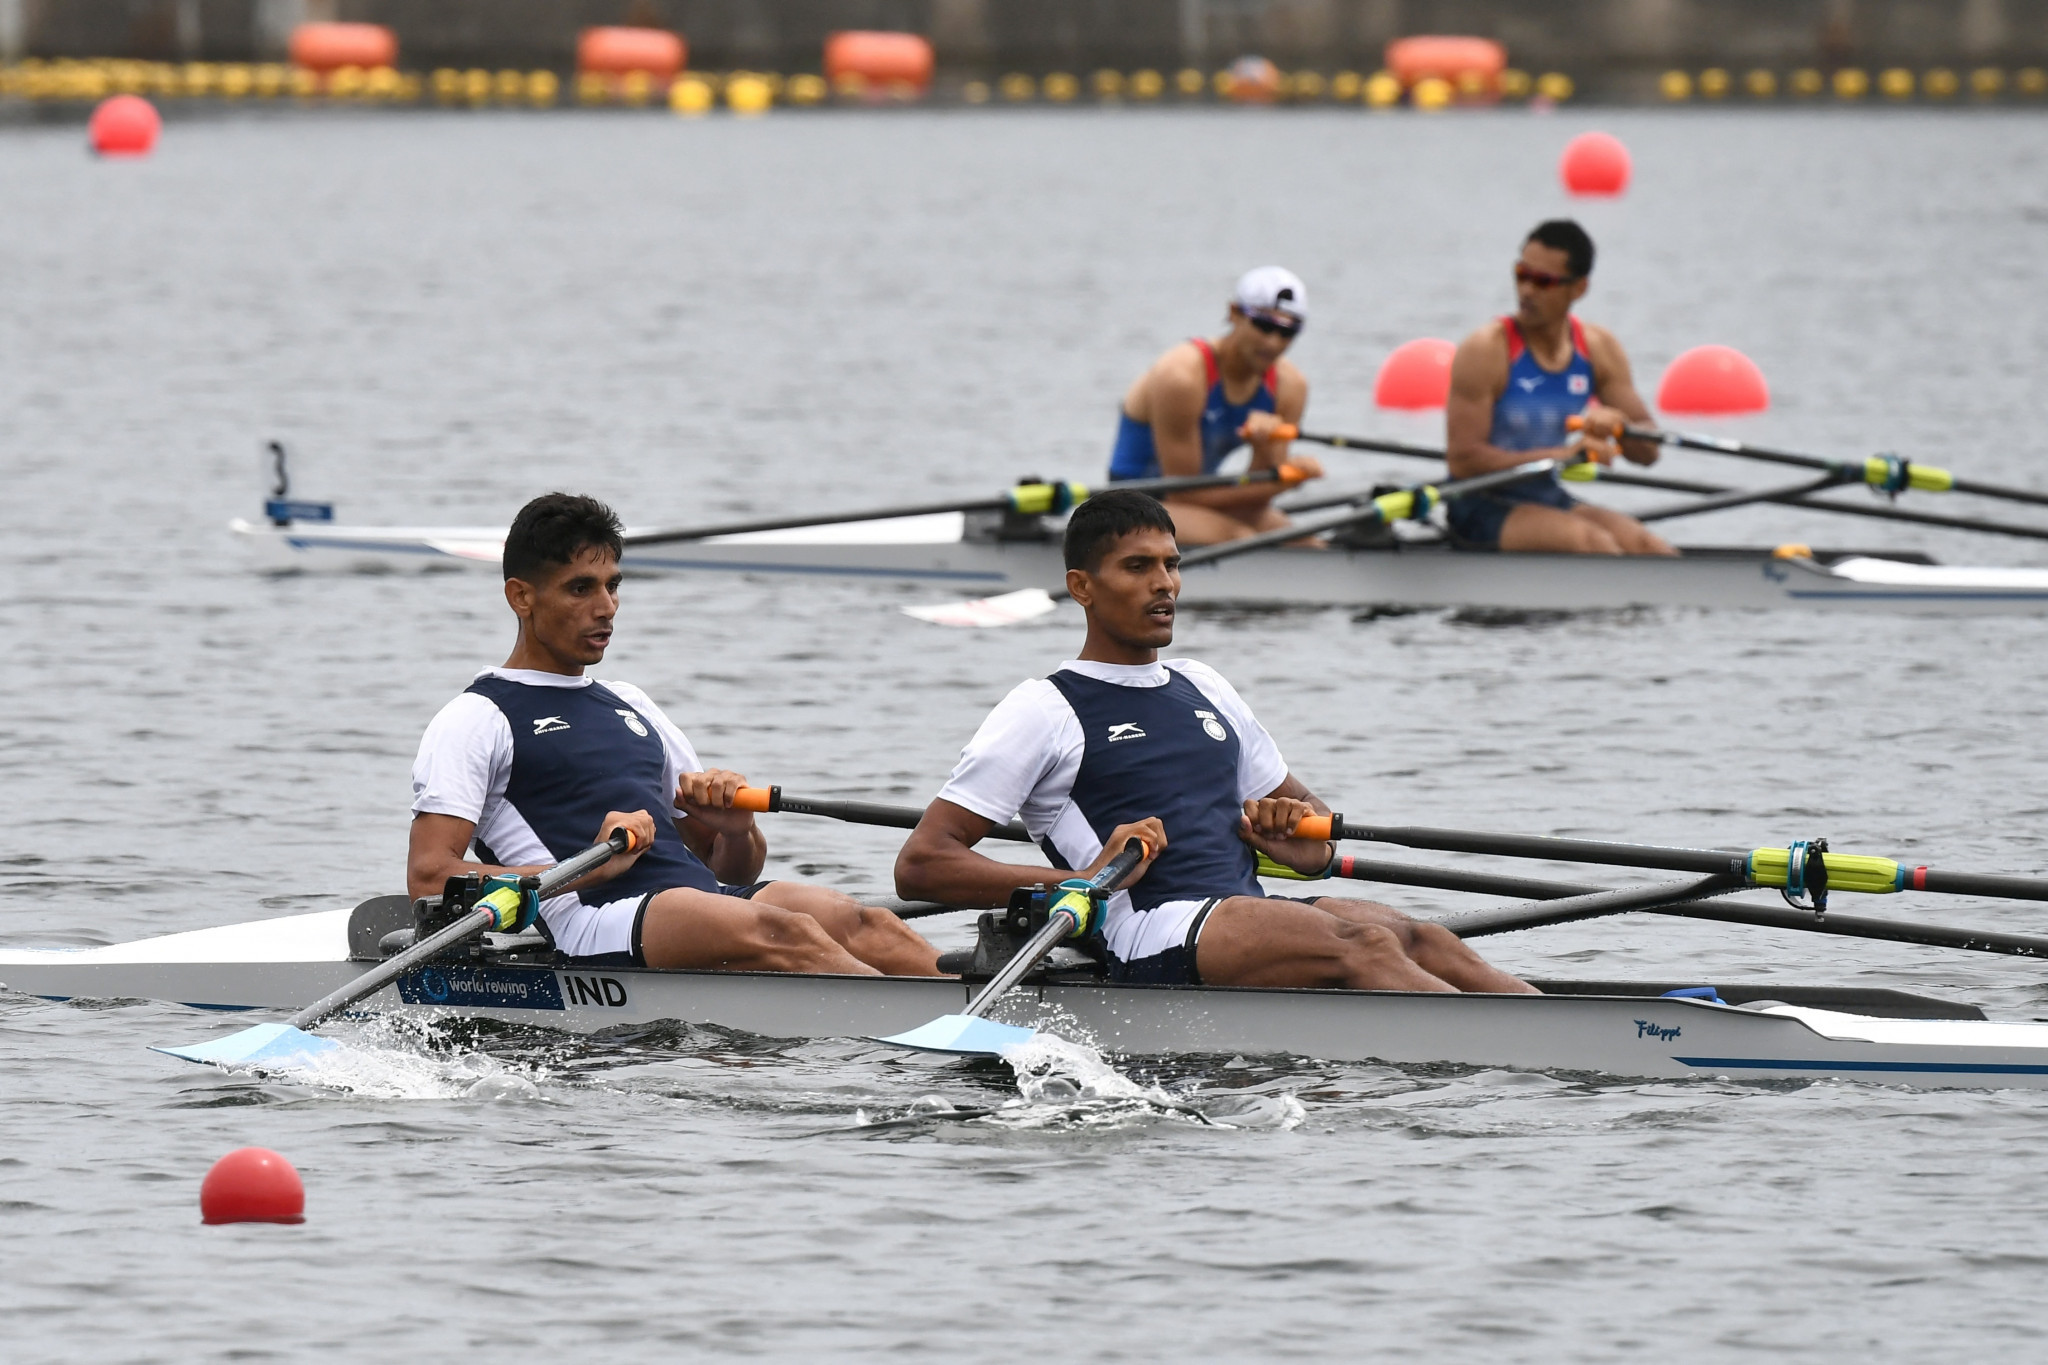 Arjun Lal Jat and Arvind Singh qualified for the Olympics earlier this month in Tokyo ©Getty Images